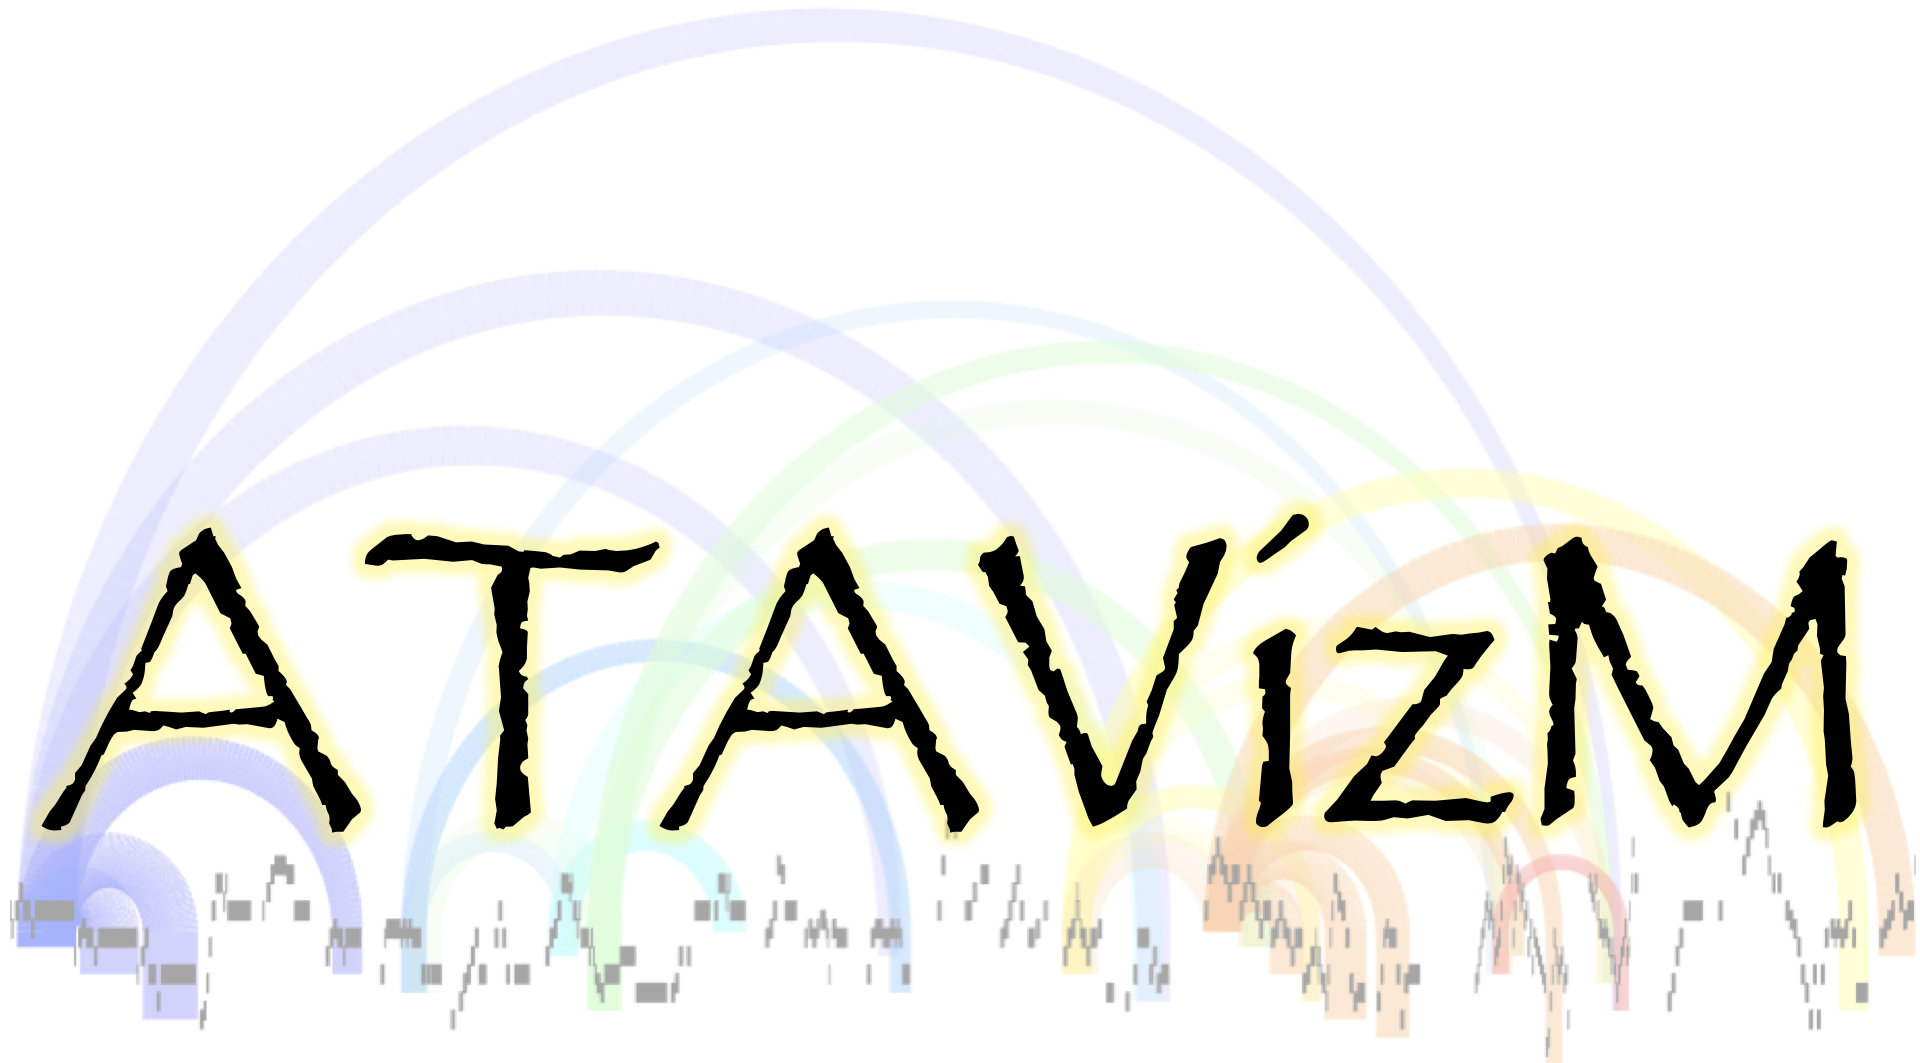 ATAVizM (Algorithmic Thinking, Analysis and Visualization in Music) is a music analysis and visualization software intended for classroom use.